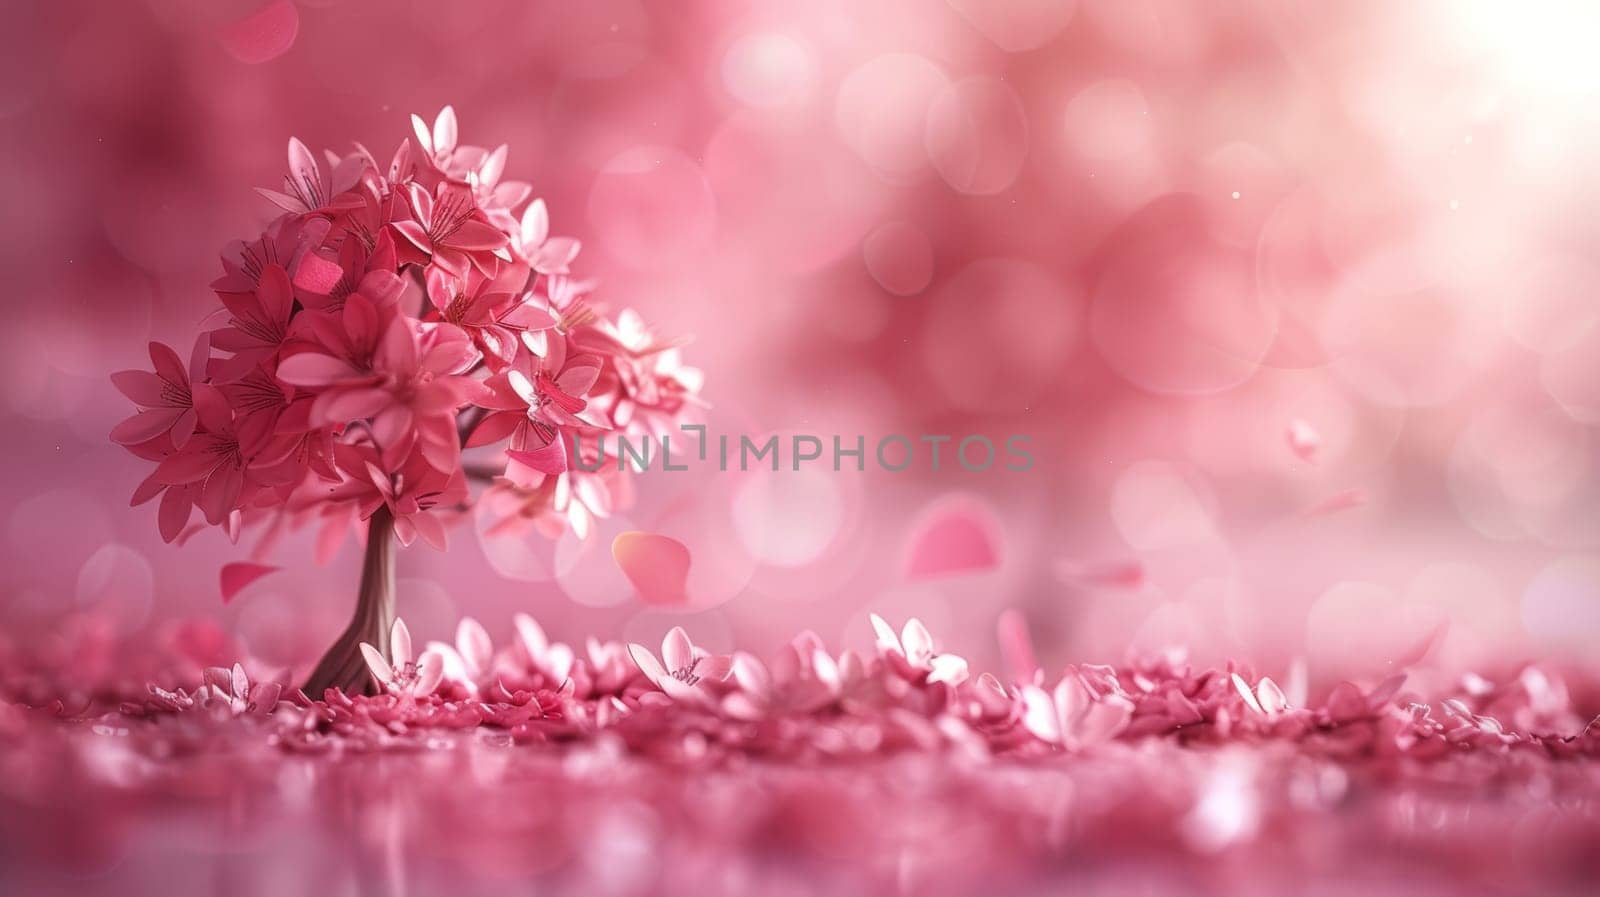 Pink Cherry Blossom Tree in Springtime Sunlight with Falling Petals